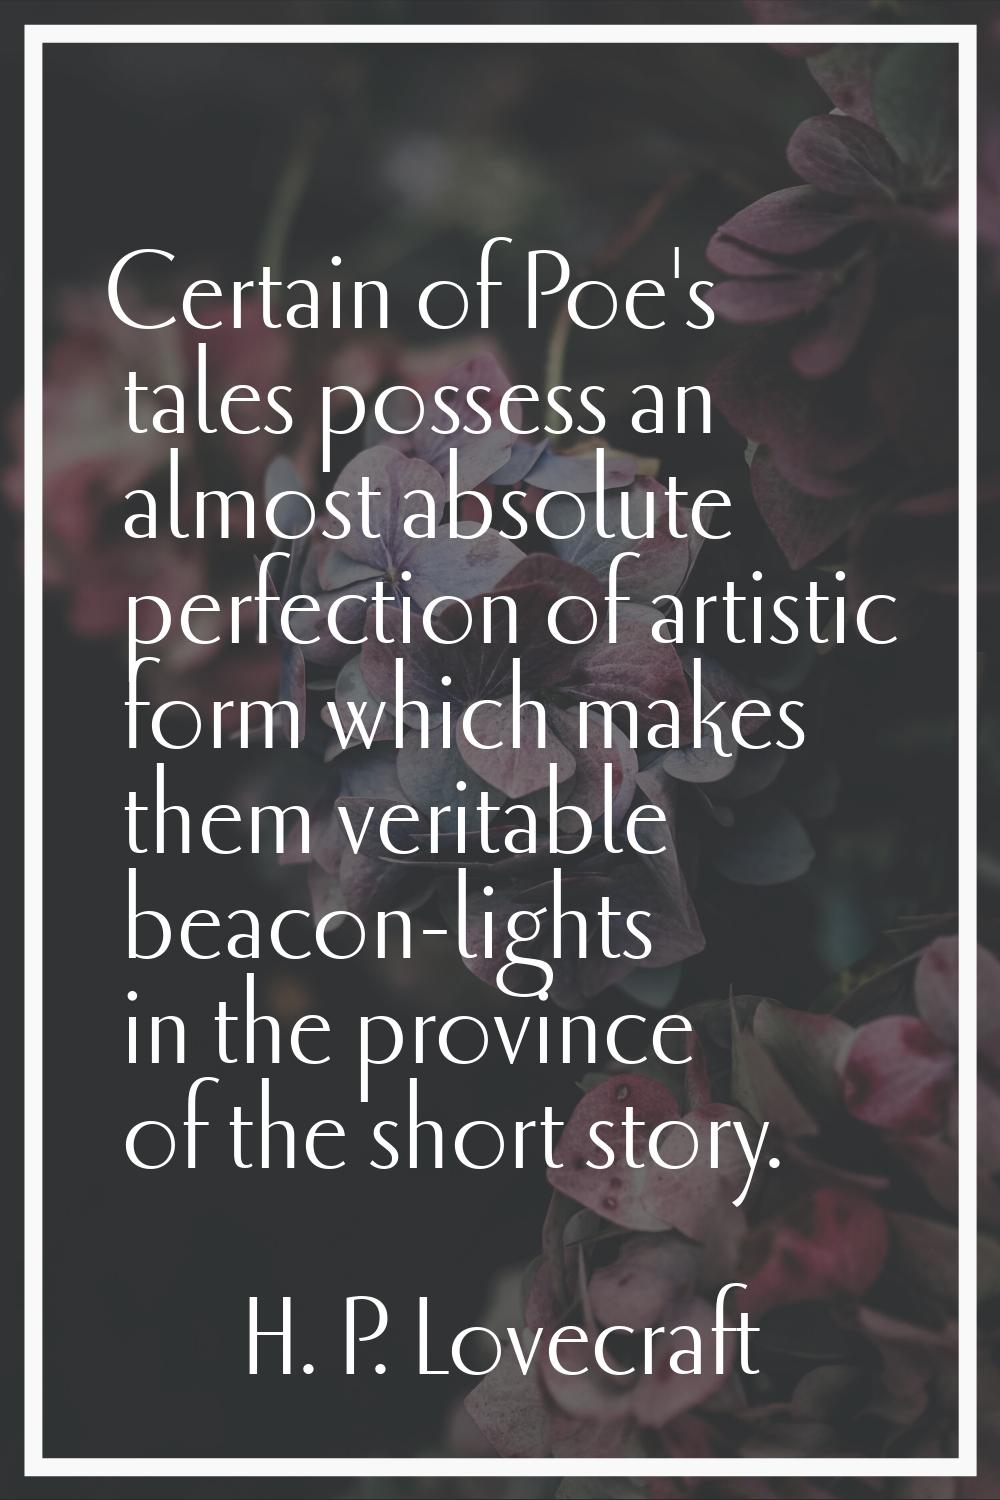 Certain of Poe's tales possess an almost absolute perfection of artistic form which makes them veri